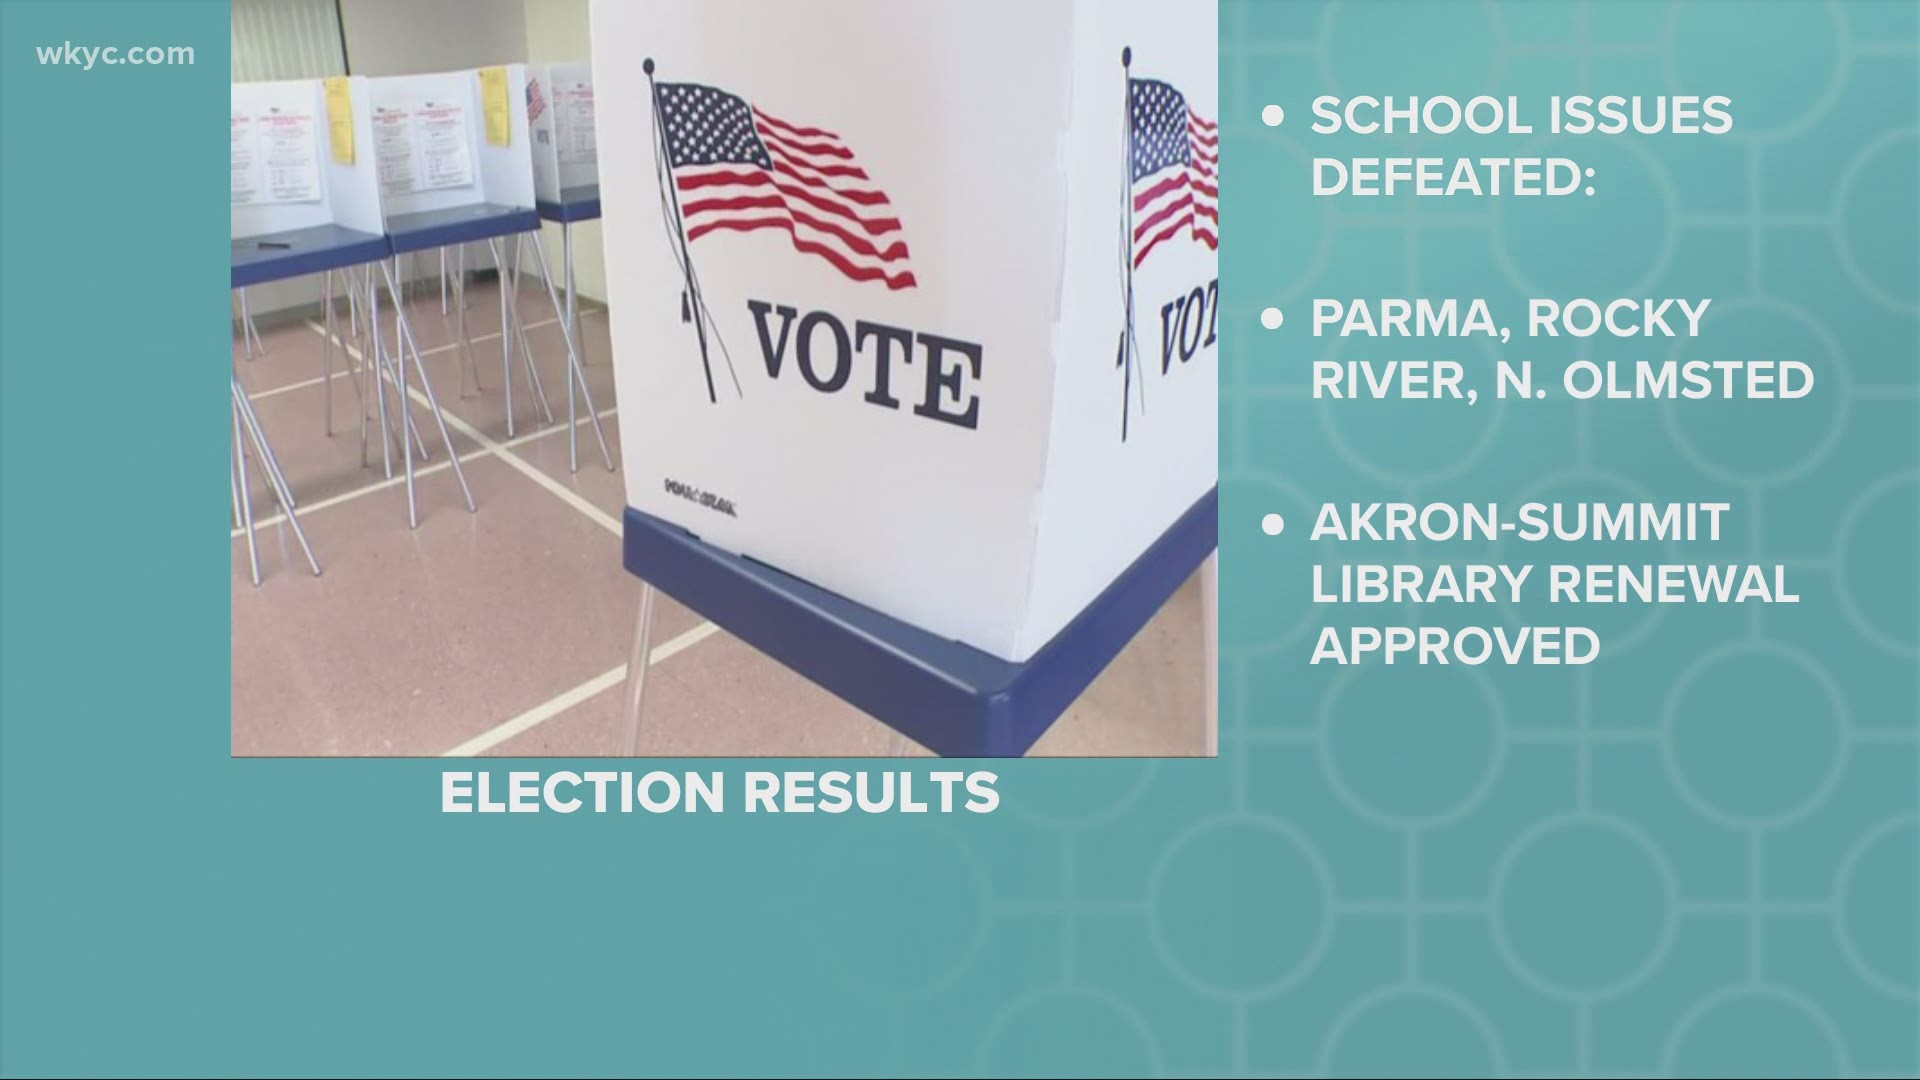 New levies in places like Brunswick and Louisville passed, while others in Parma and Ashtabula failed.